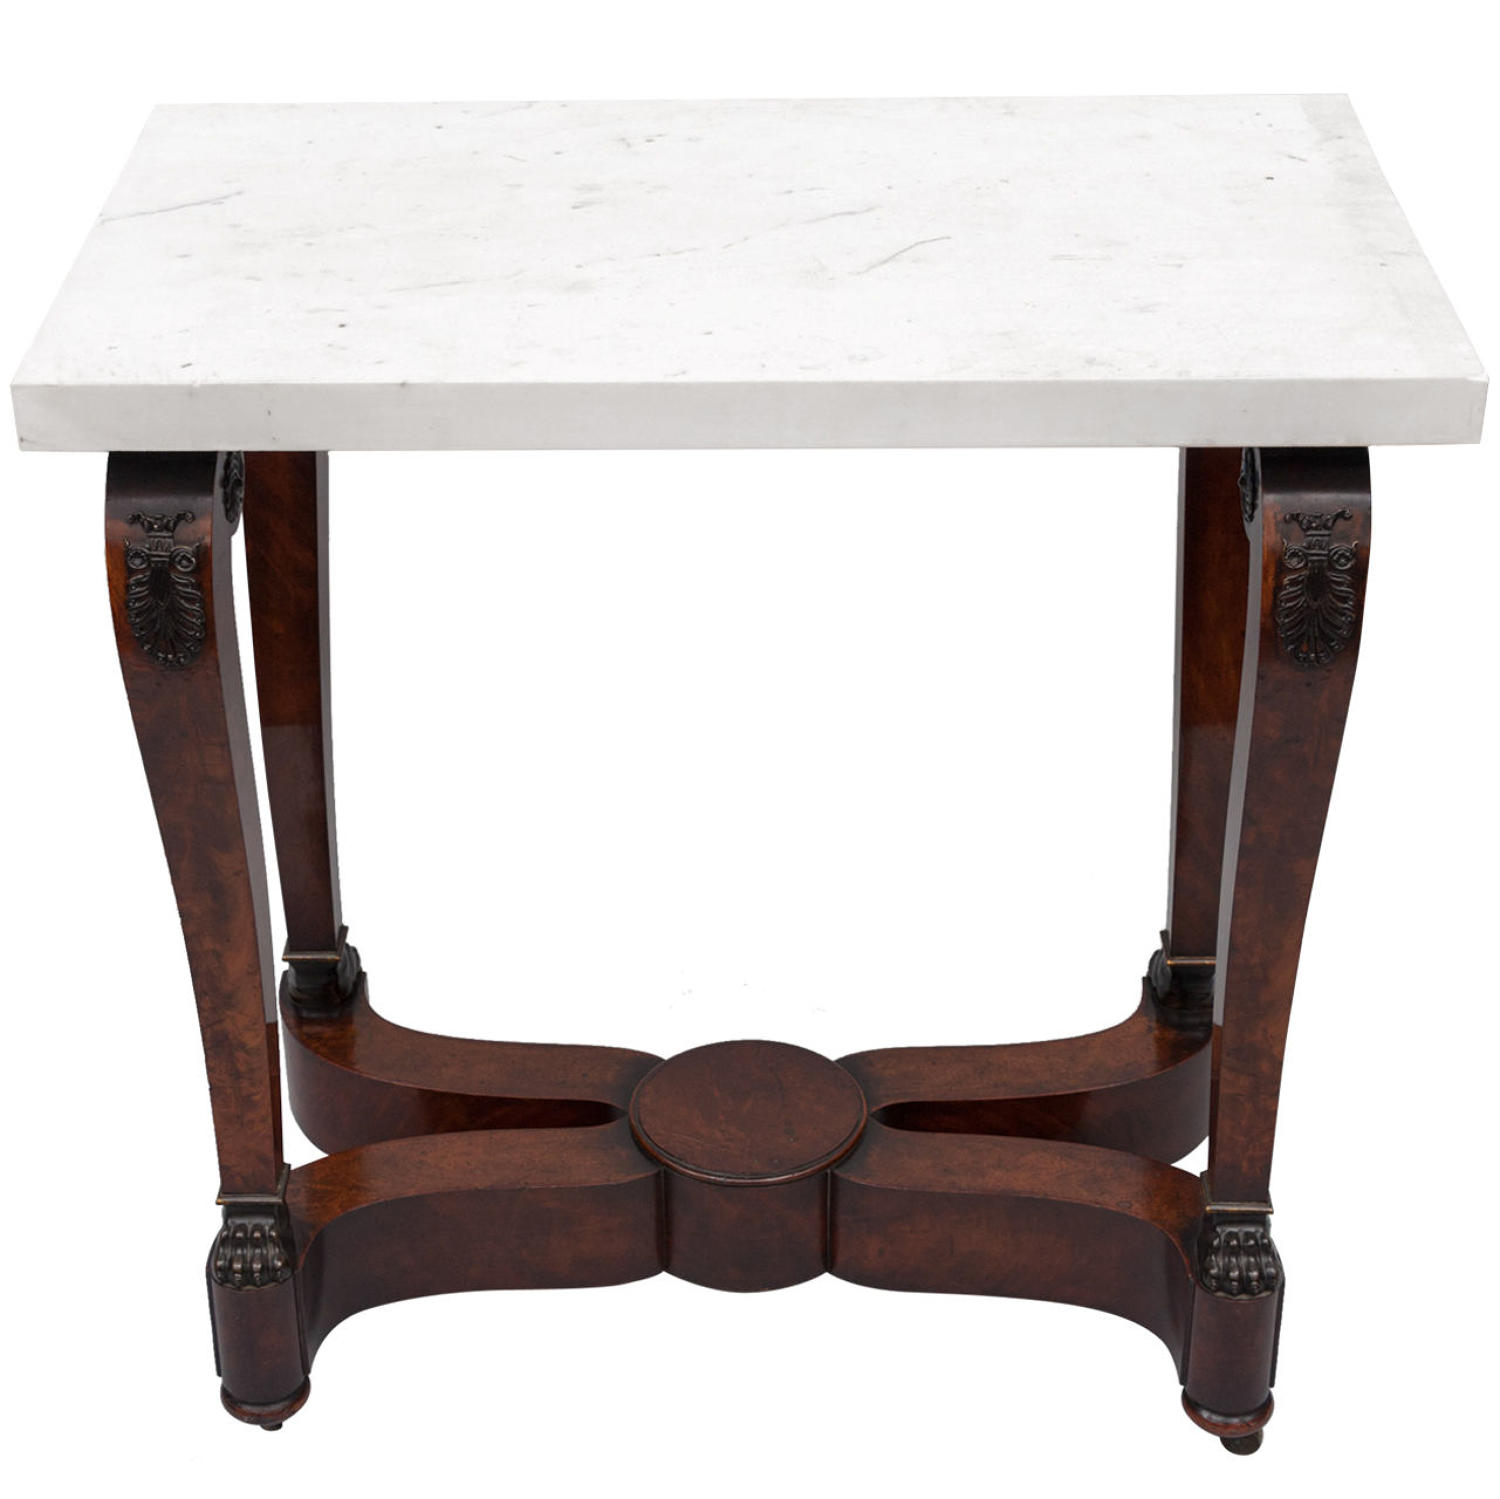 C19th french empire centre table